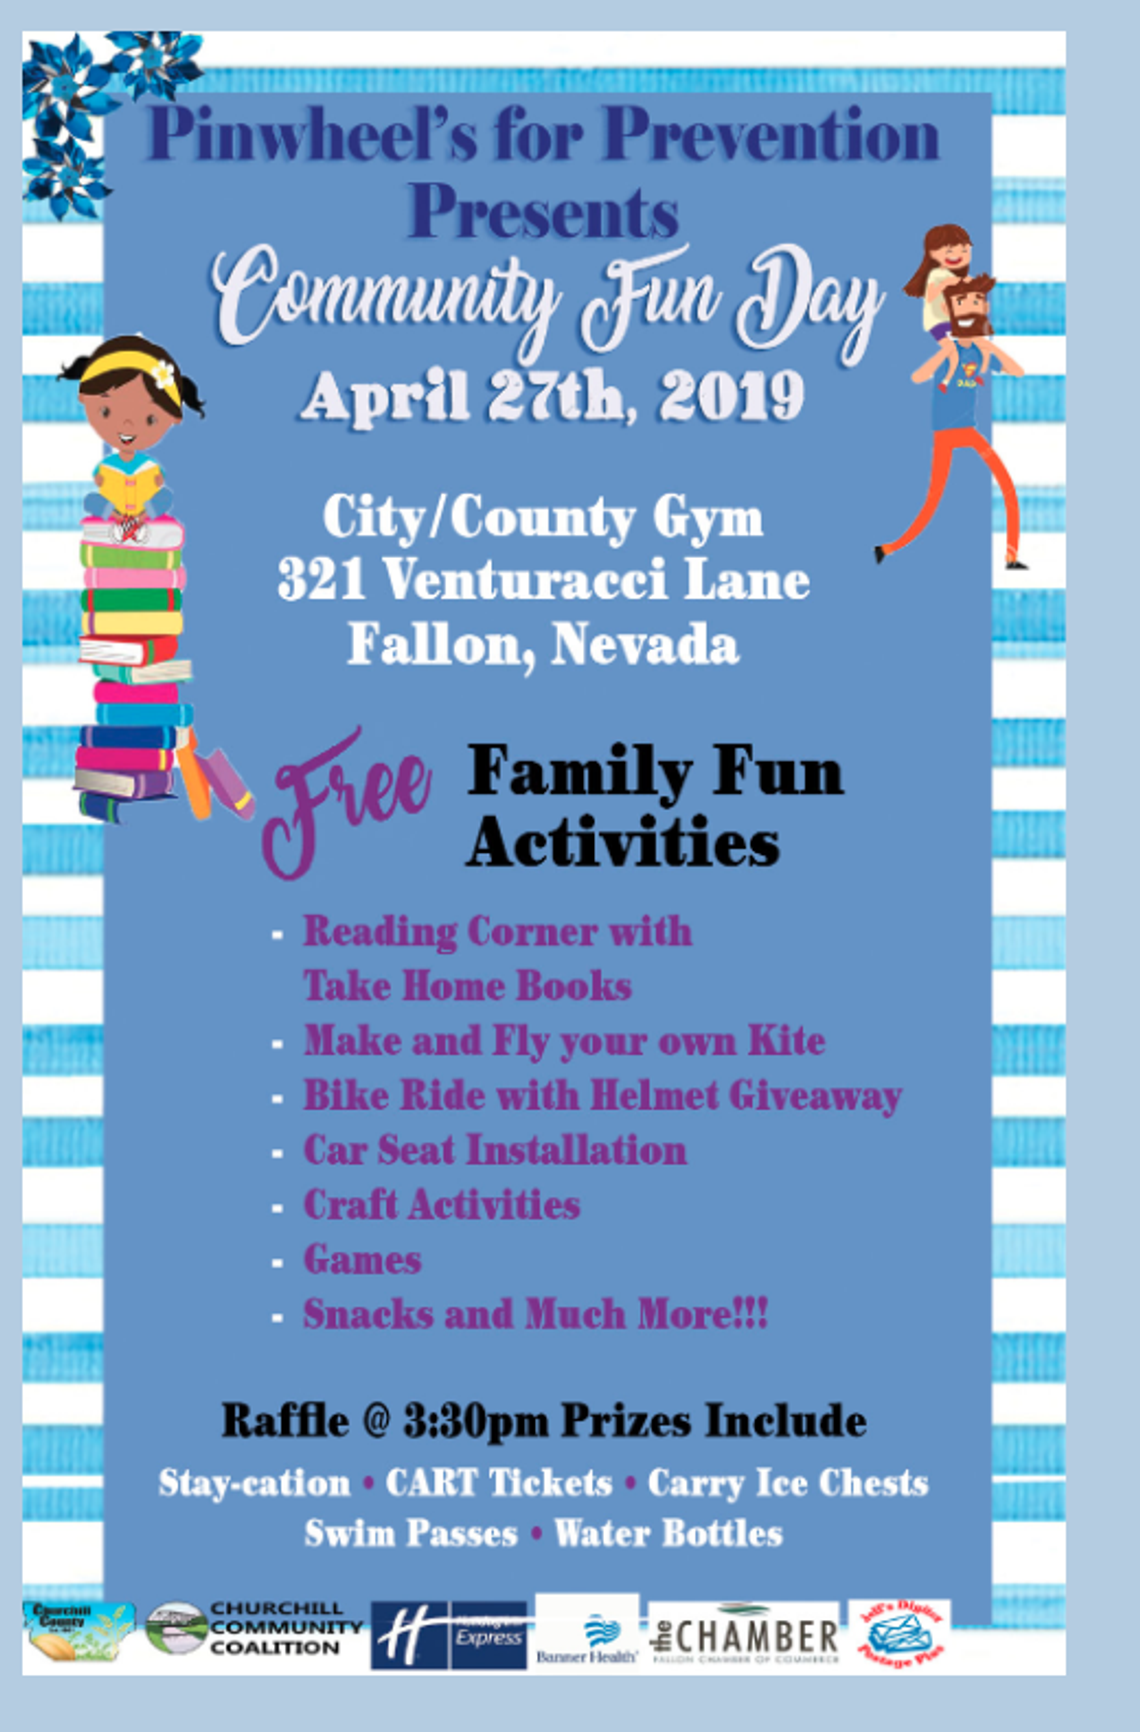 Today is Community Fun Day